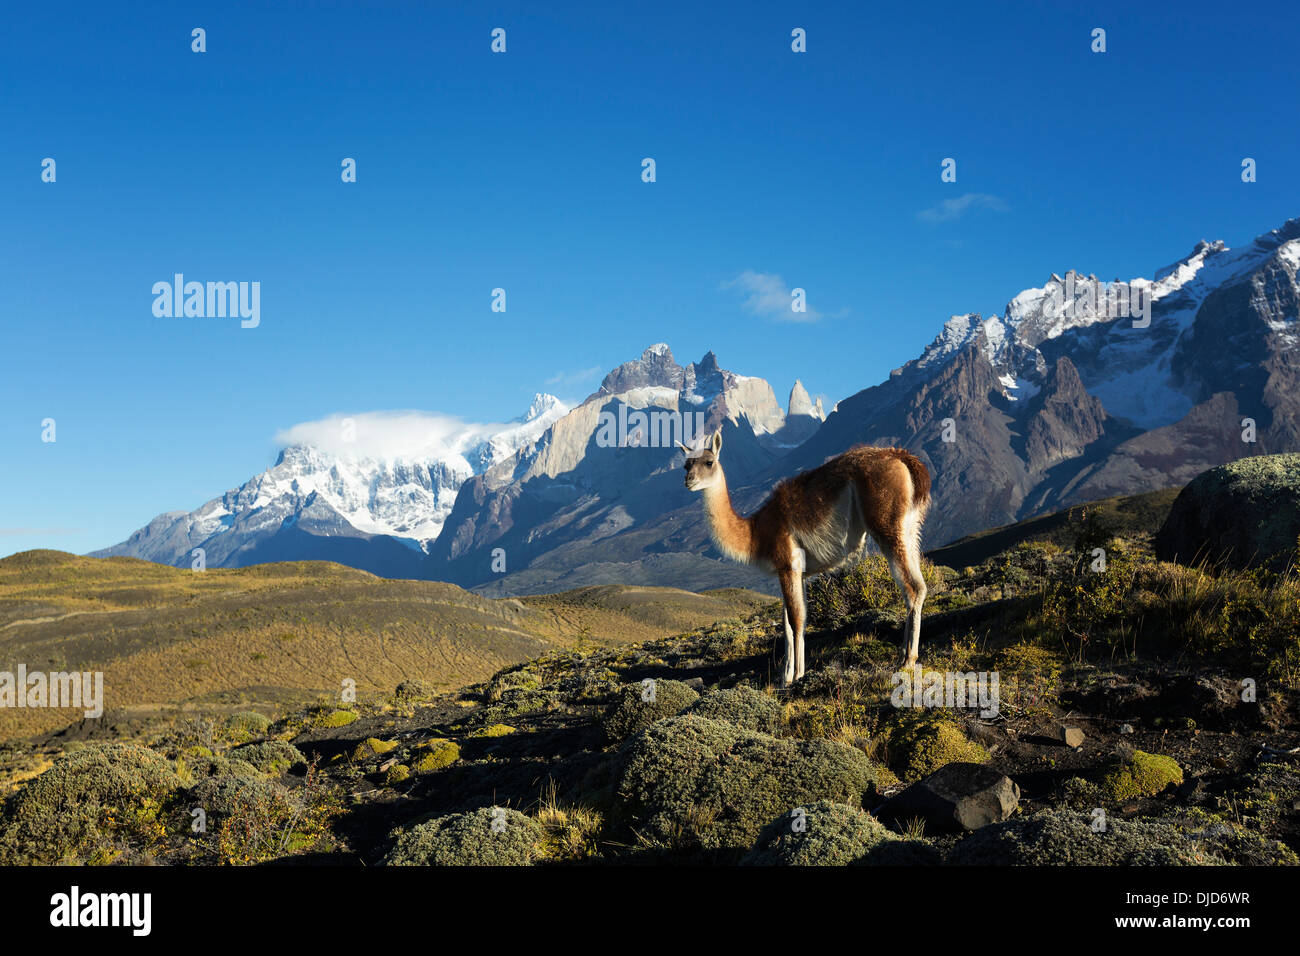 Guanaco(Lama guanicoe) standing on the hillside with Torres del Paine mountains in the background.Patagonia.Chile Stock Photo